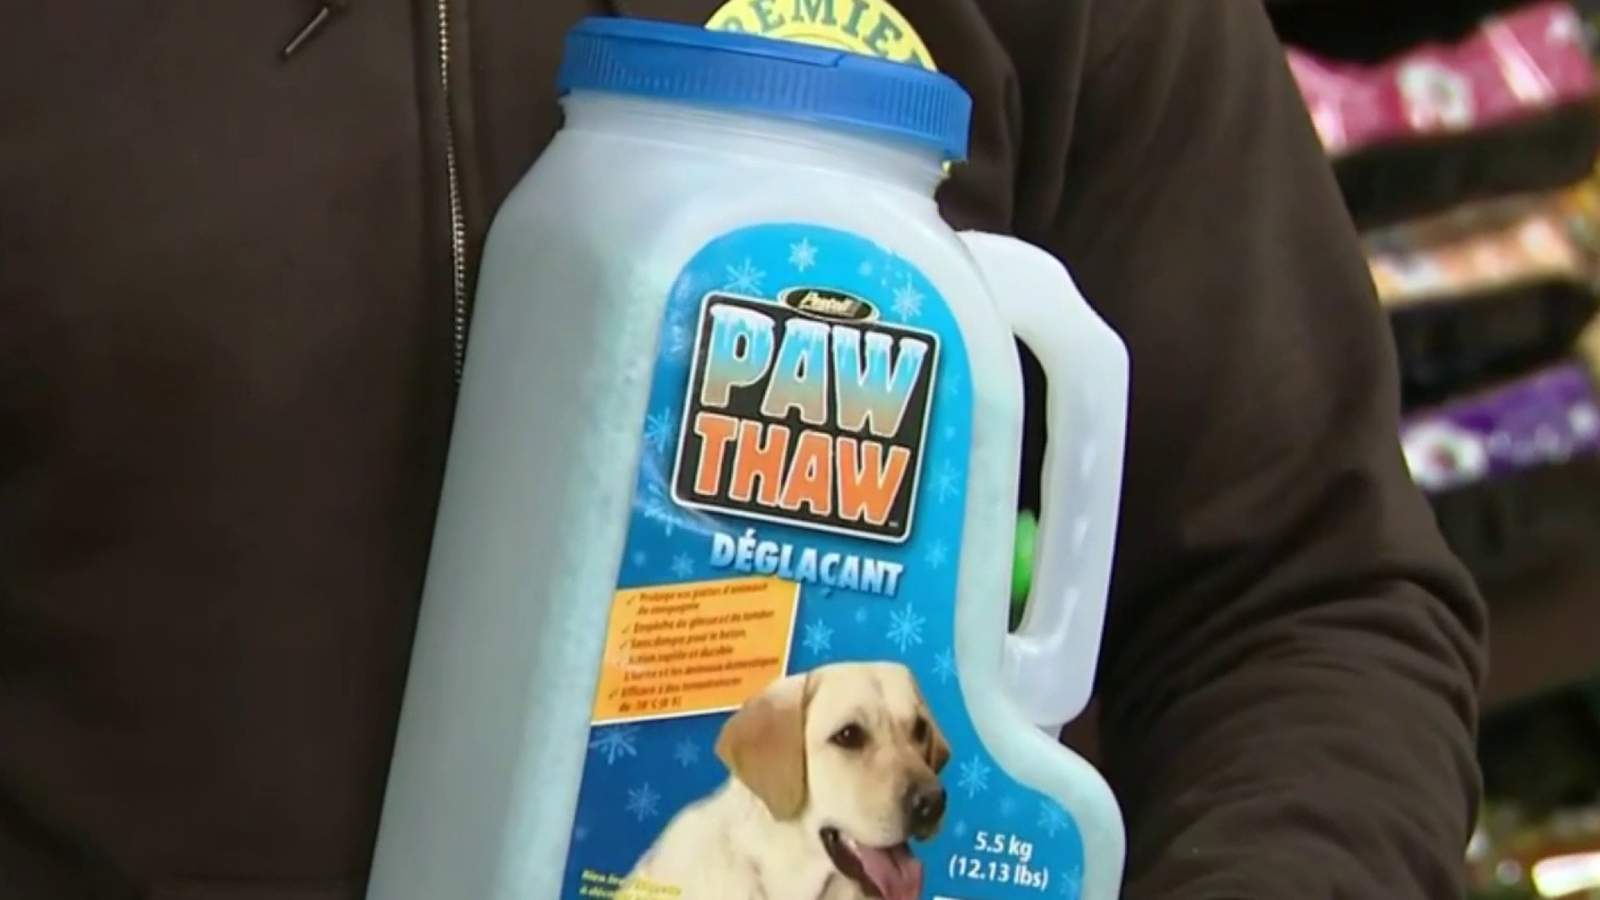 Tips on keeping the paws of pets clean